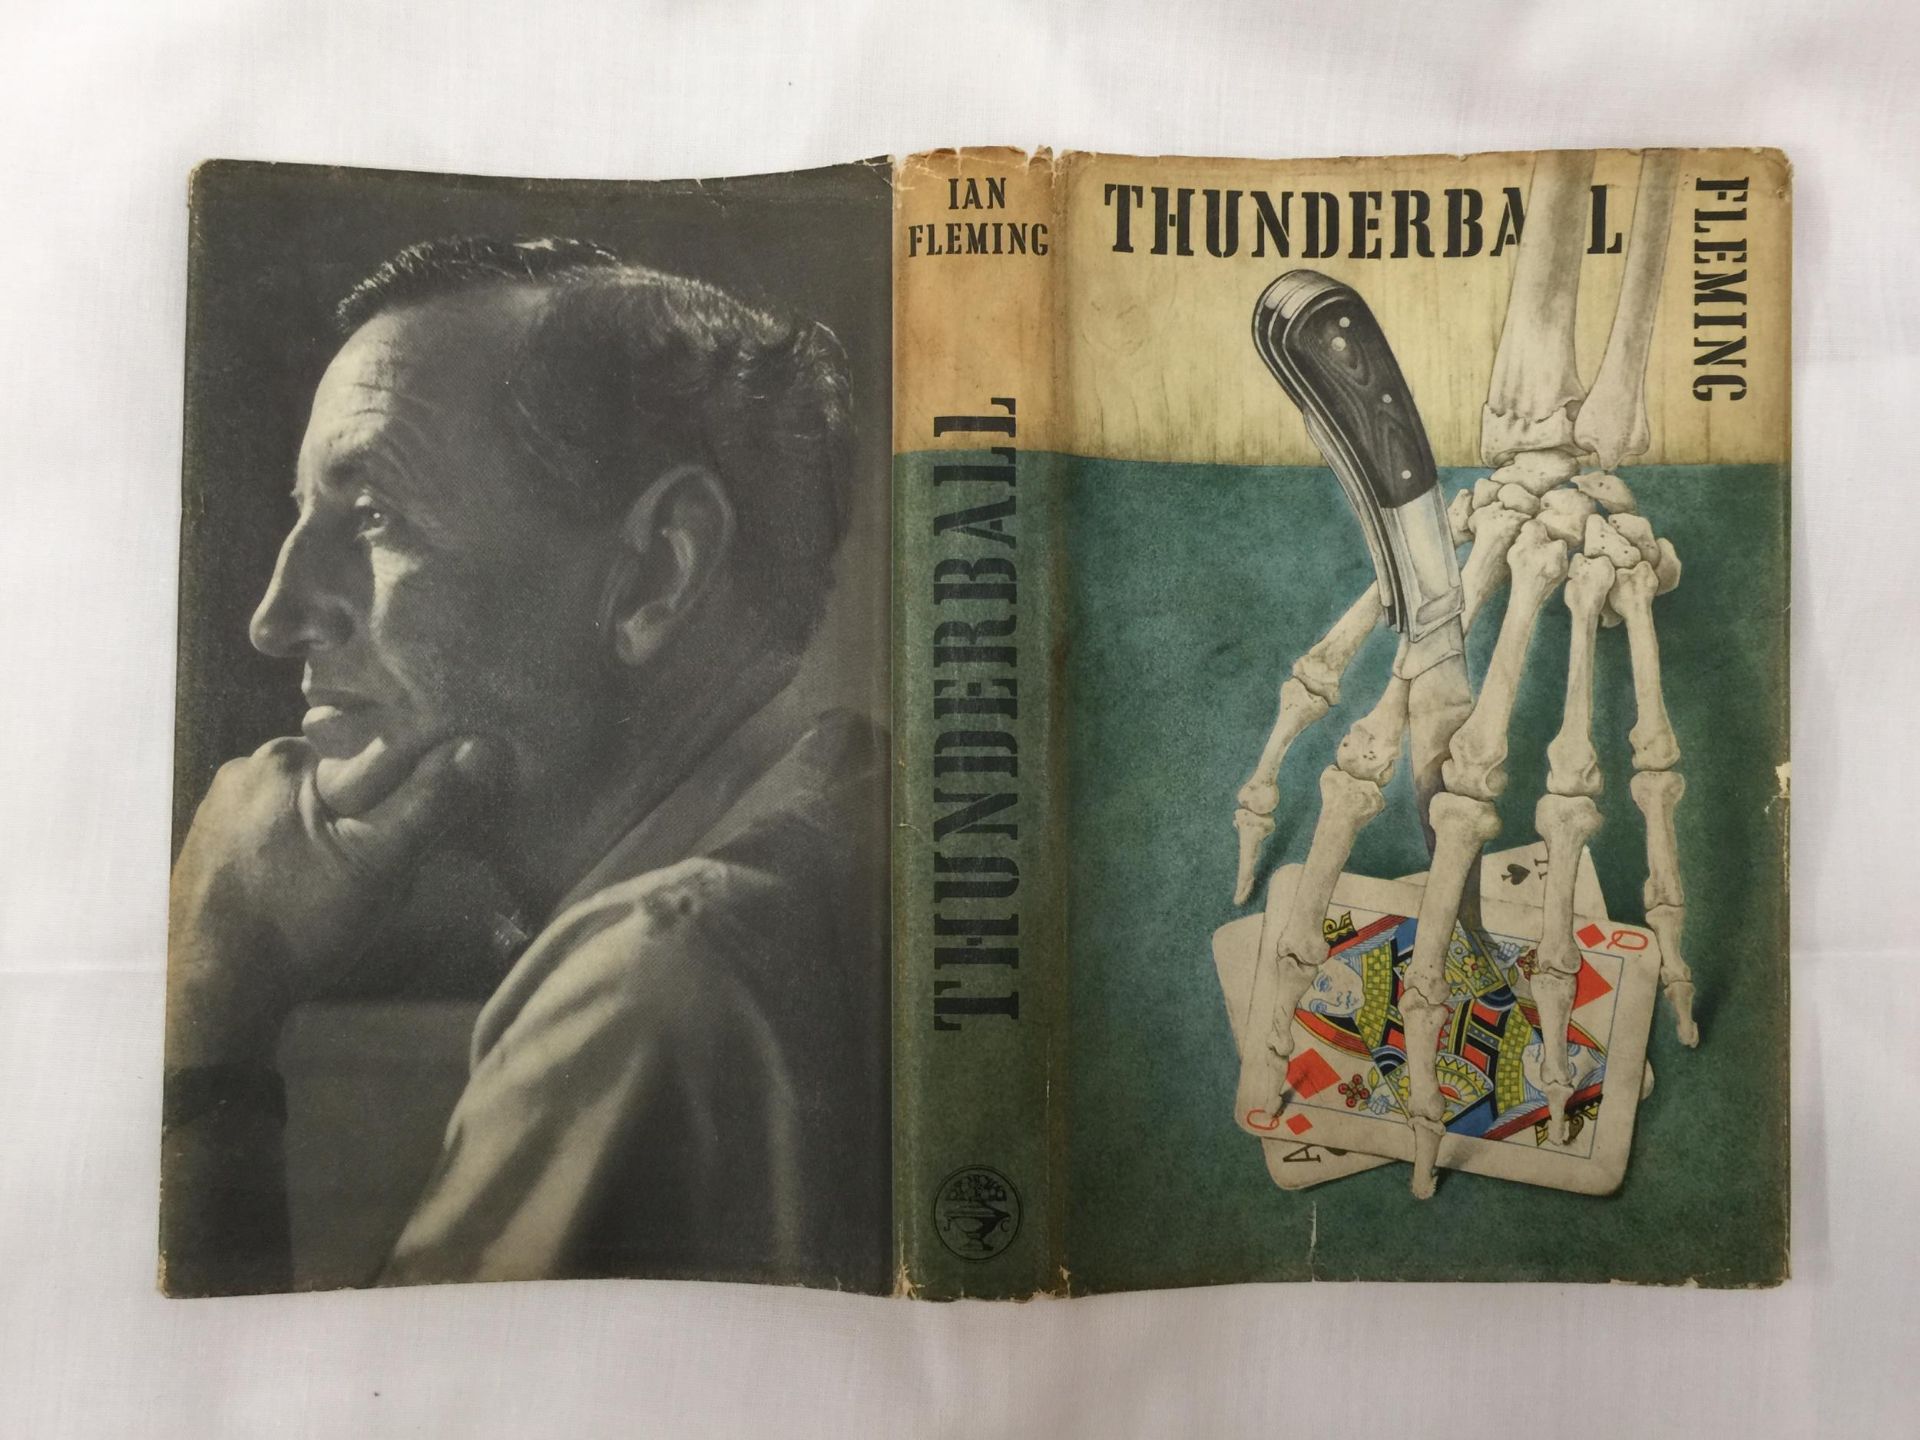 A FIRST EDITION JAMES BOND NOVEL - THUNDERBALL BY IAN FLEMING, HARDBACK WITH ORIGINAL DUST - Image 12 of 12